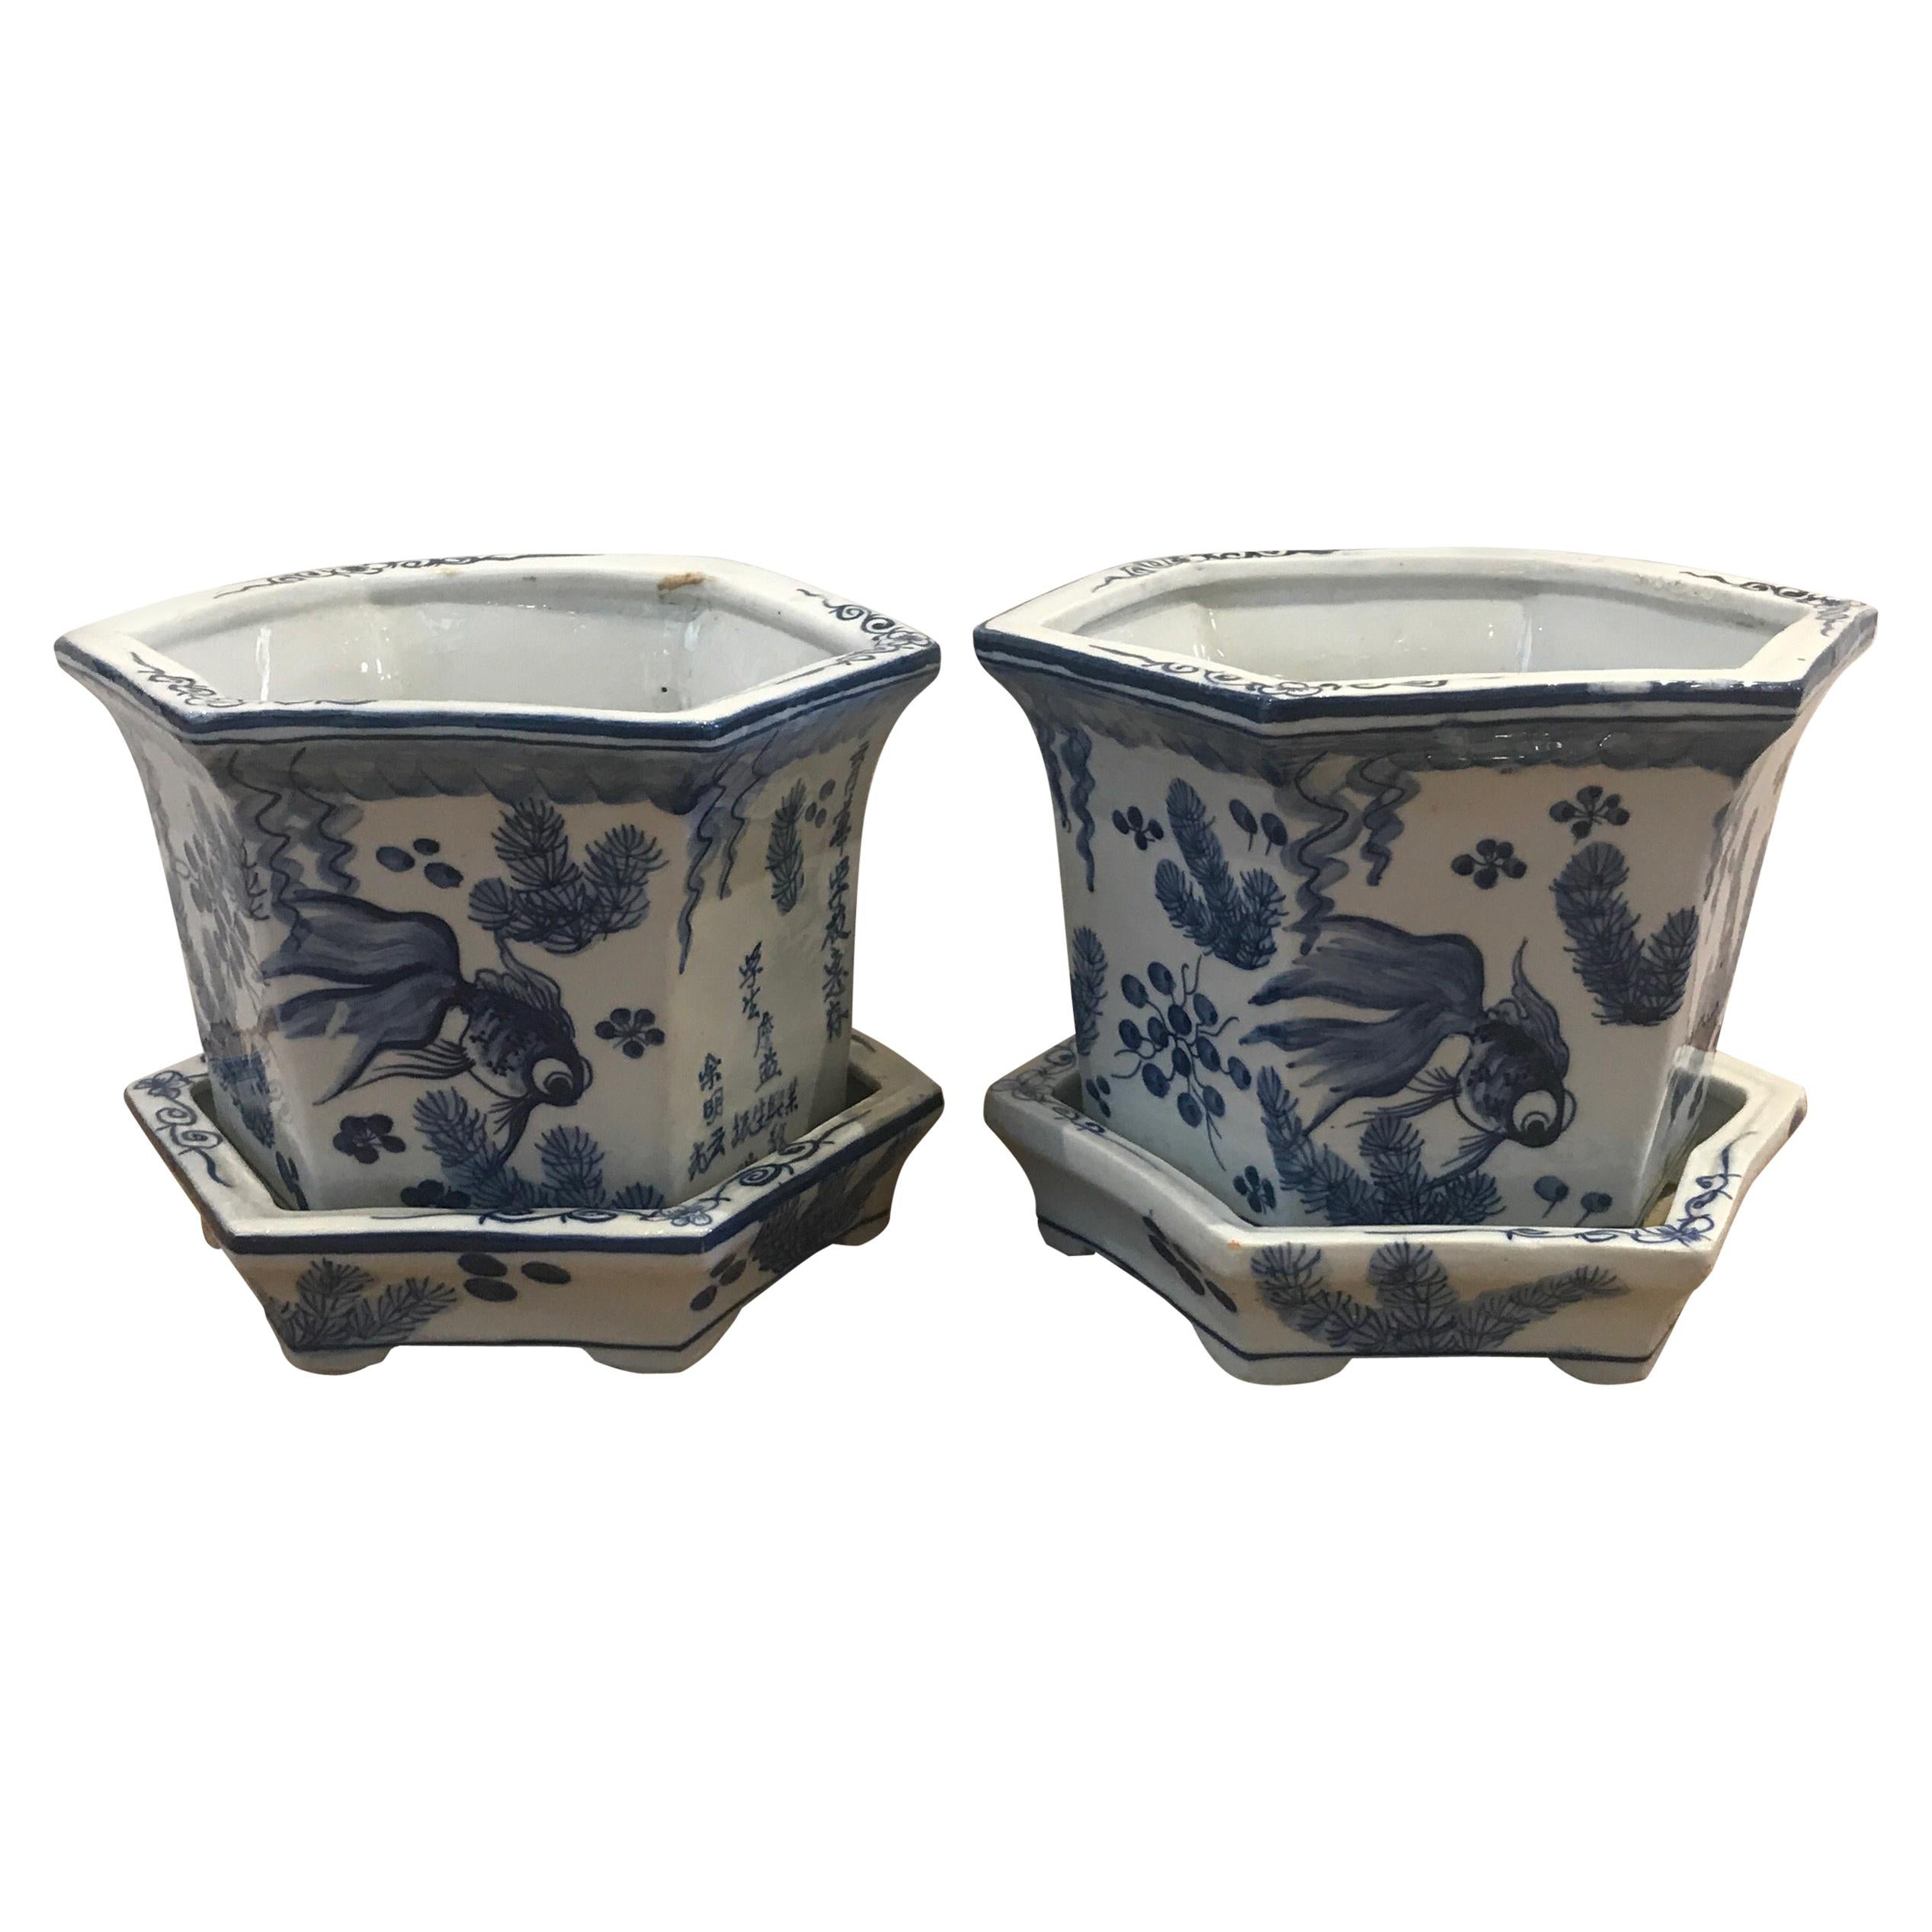 Pair of Chinese Porcelain Blue and White Planters